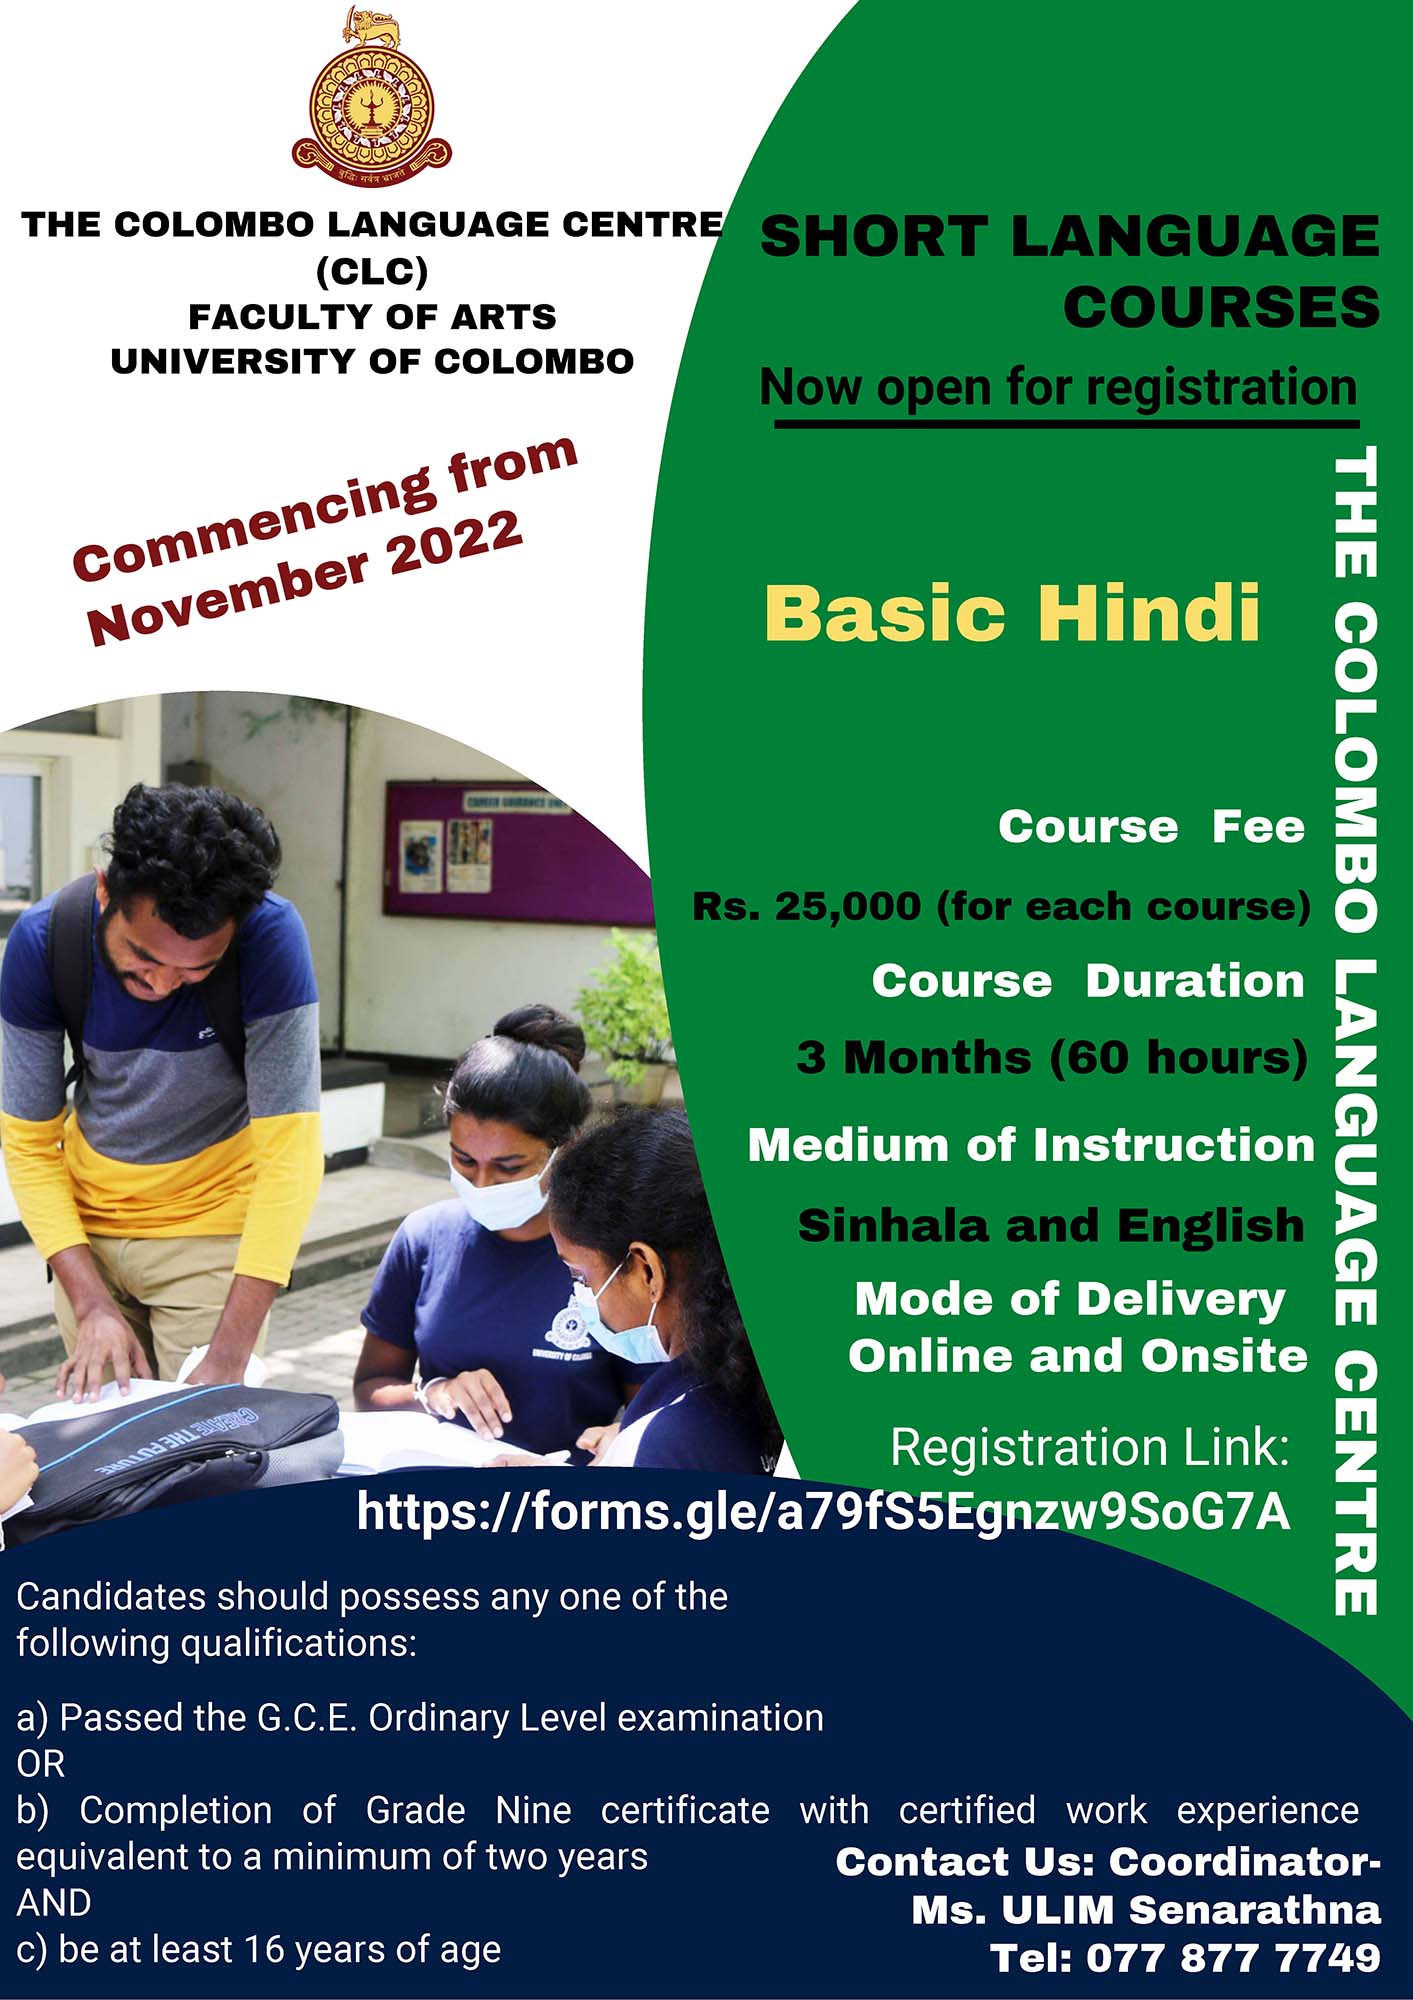 Short Courses in Tamil, French, Hindi, Japanese, Korean Languages 2022 - University of Colombo